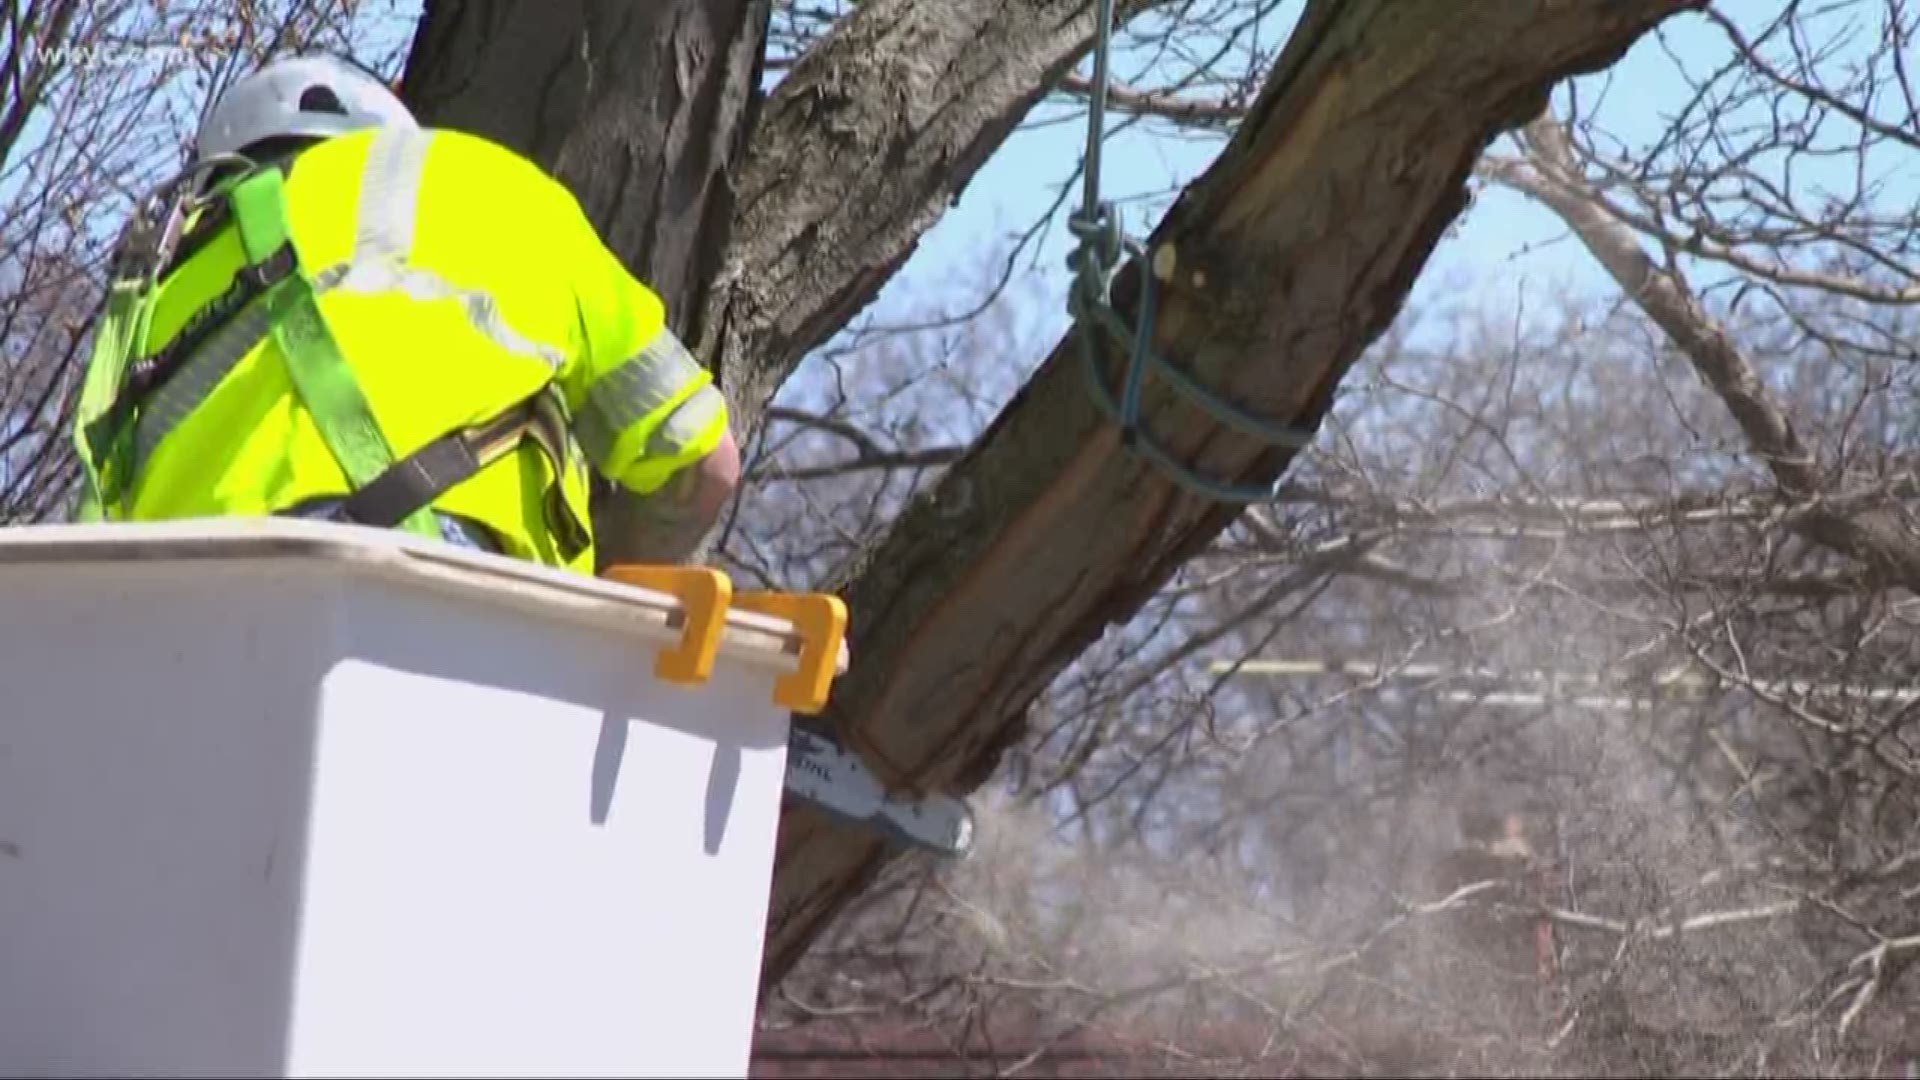 Dead, dying trees pose safety risks for residents